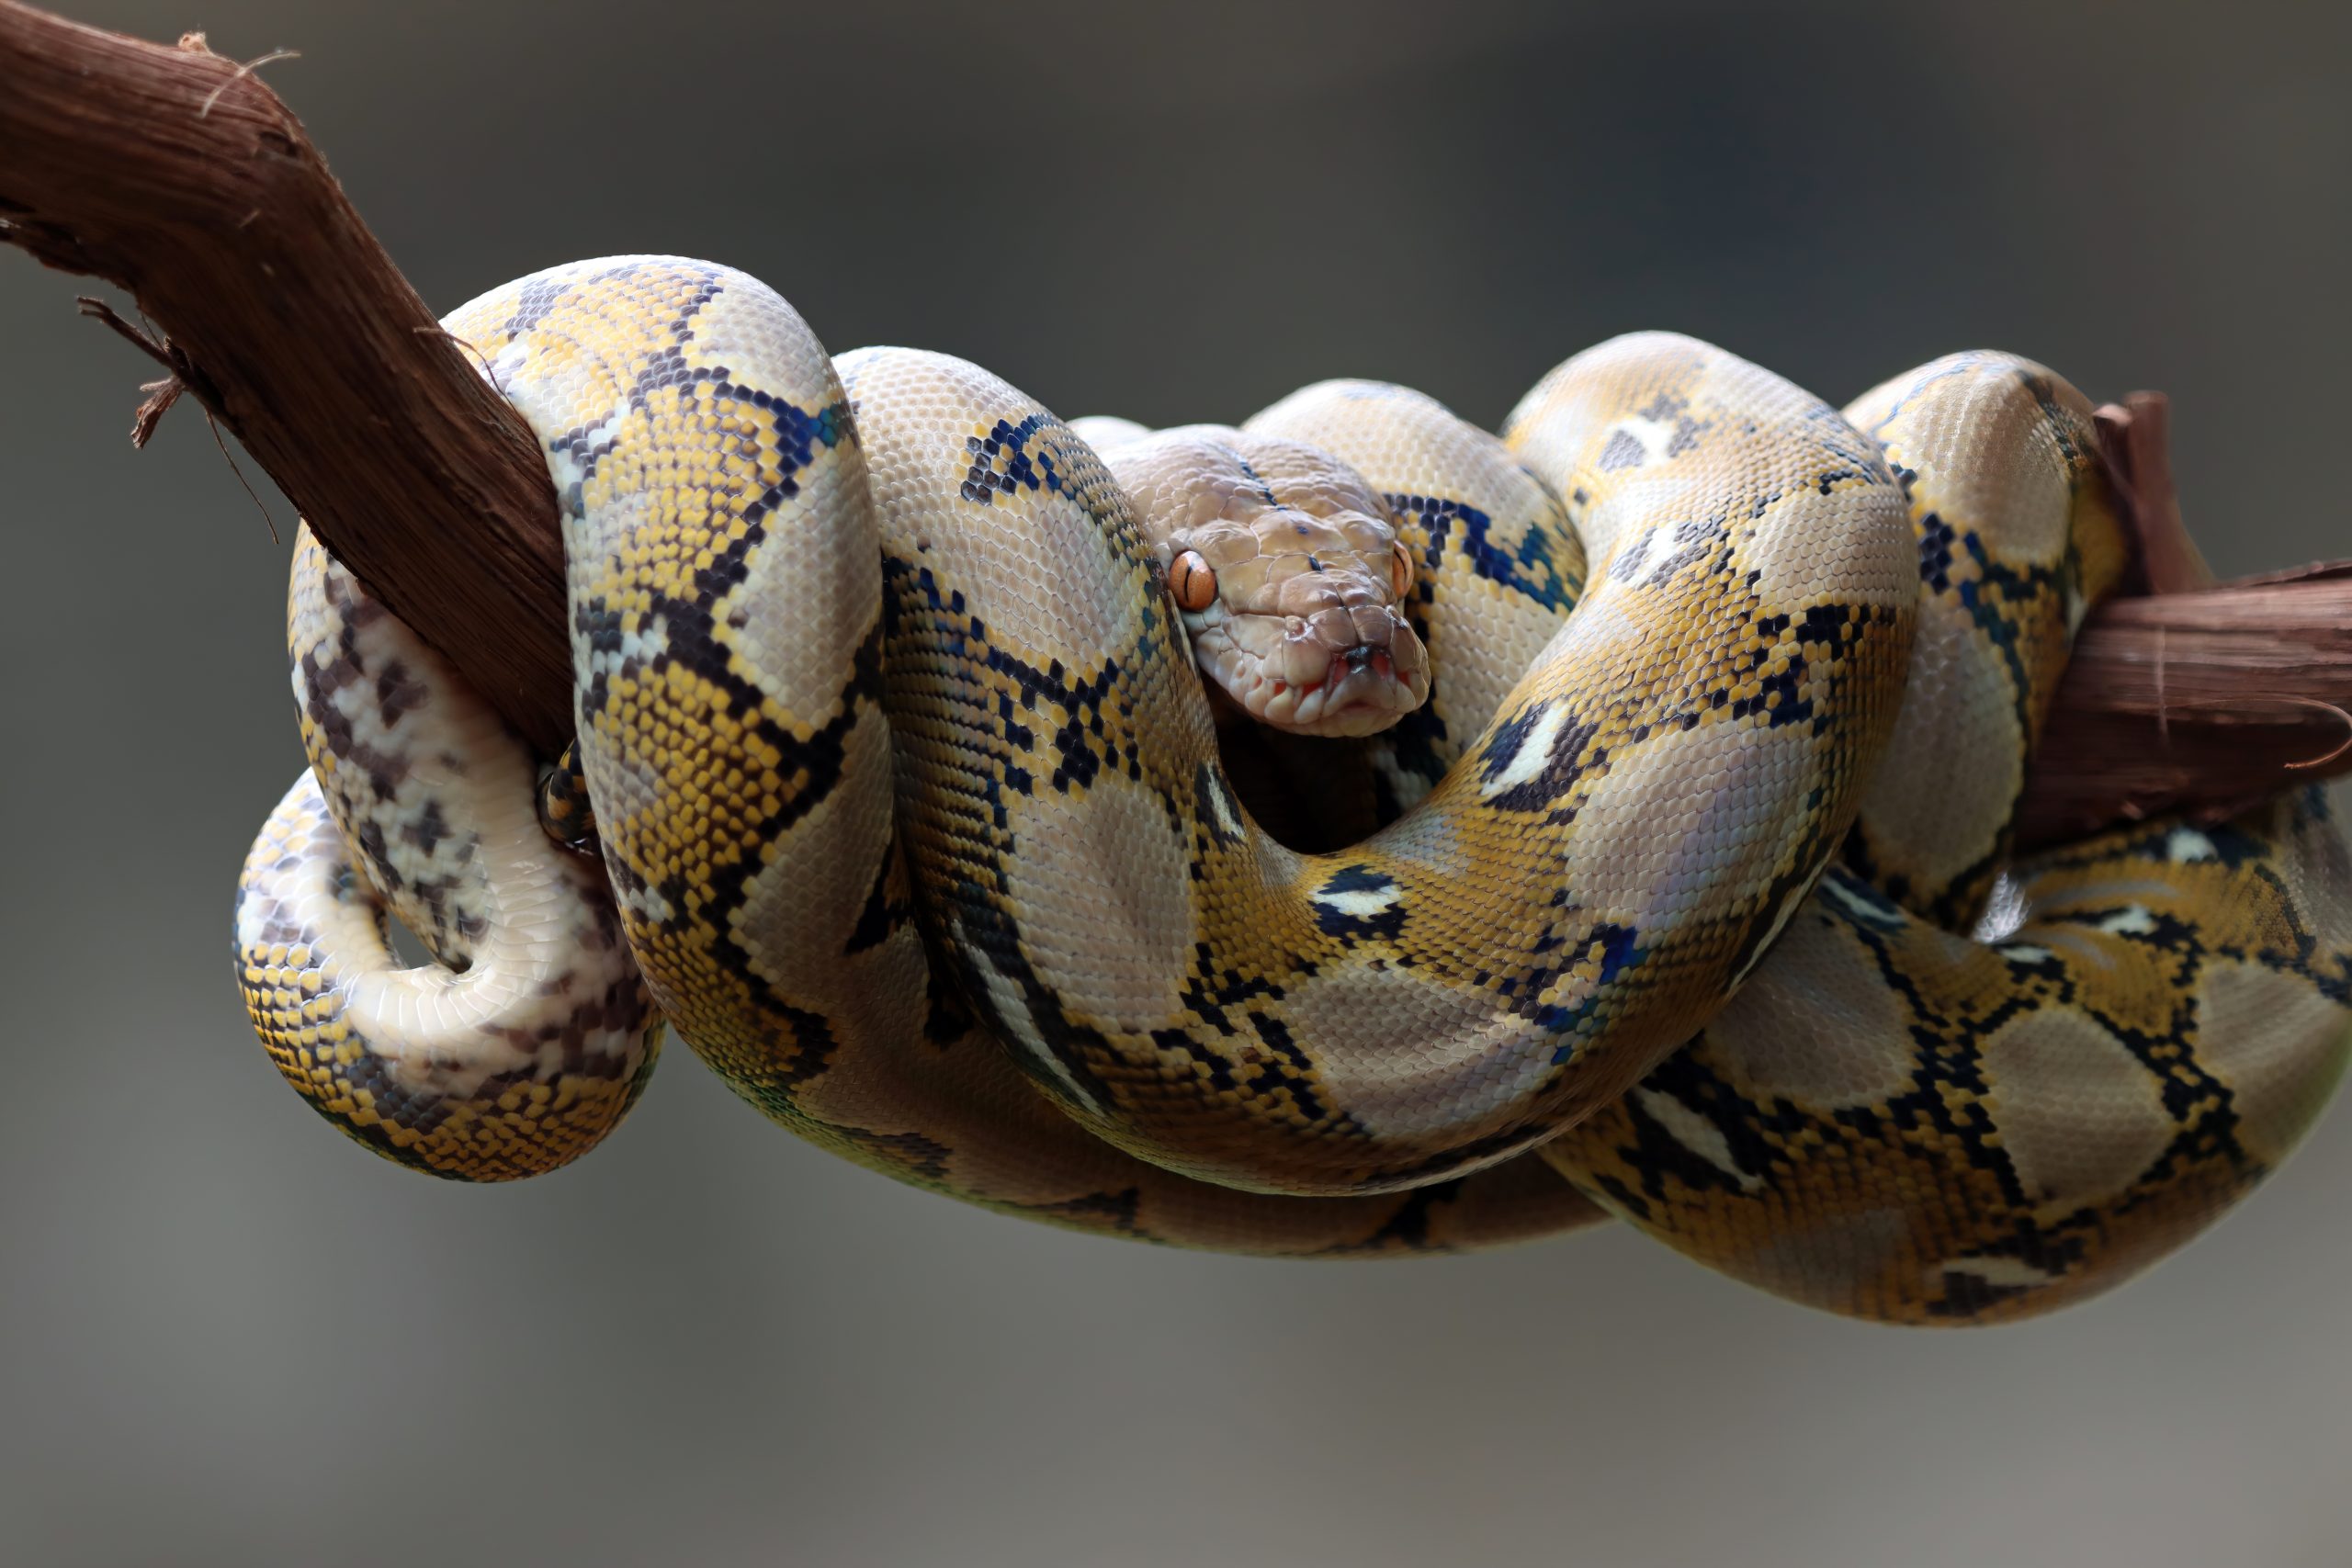 The economic and environmental importance of snakes- snake farming business